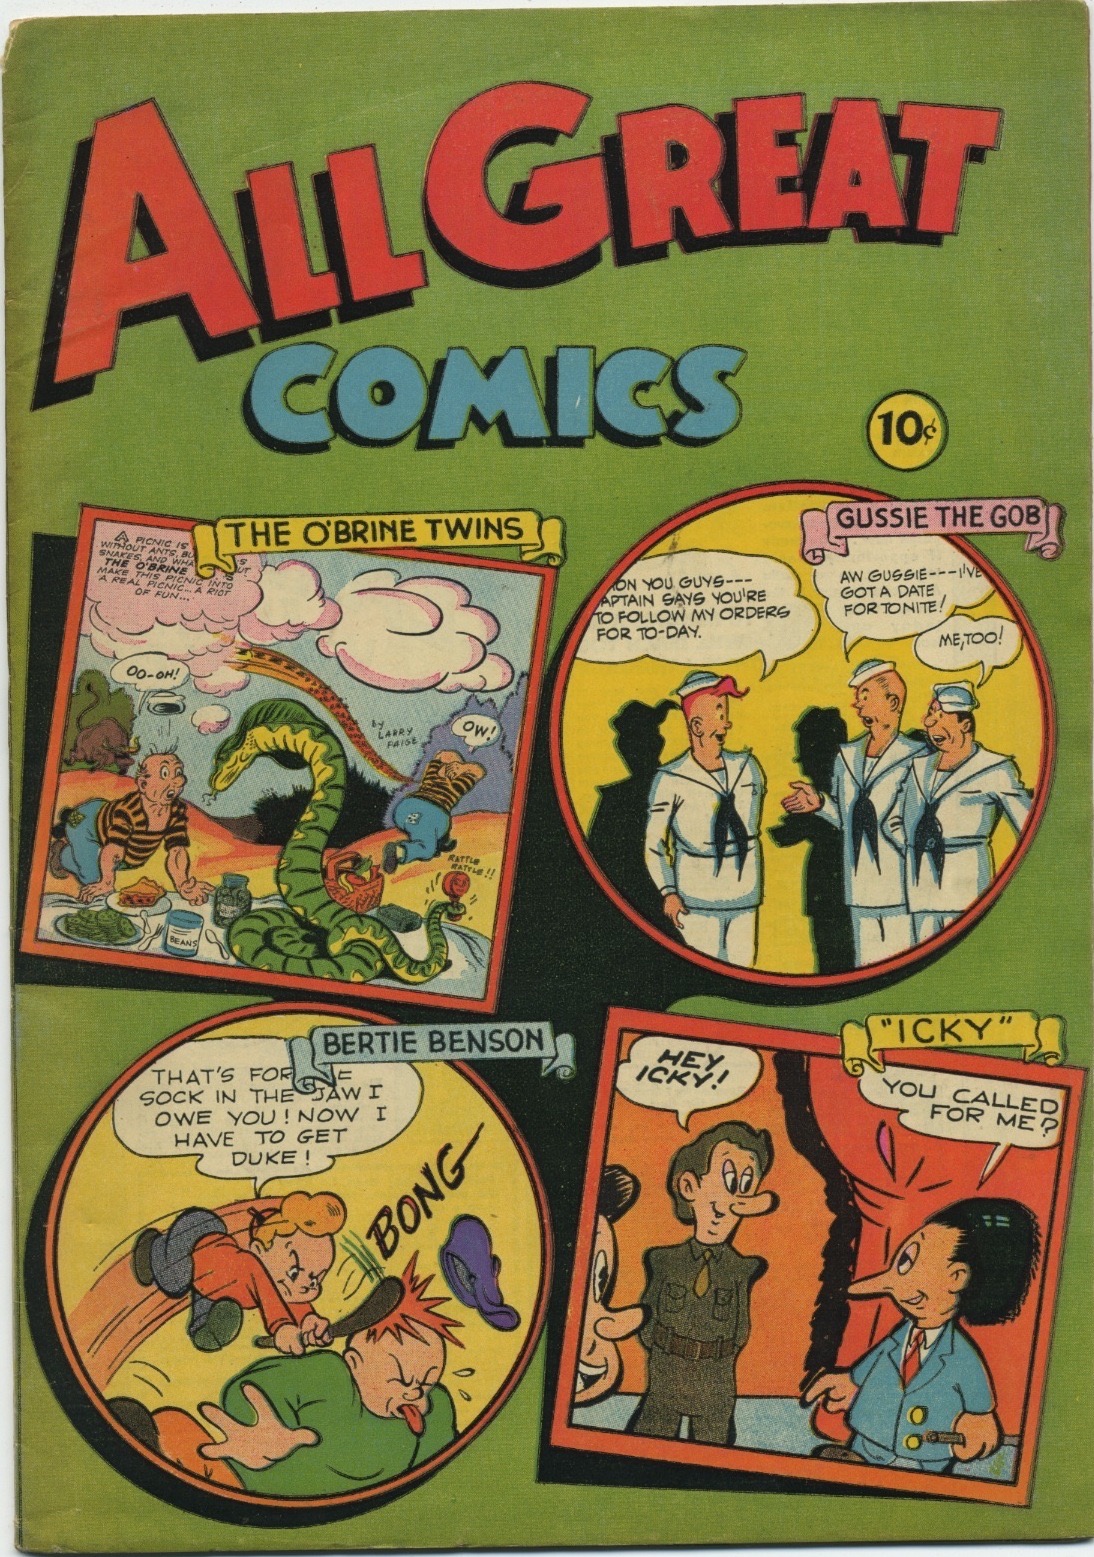 All Great Comics - Primary